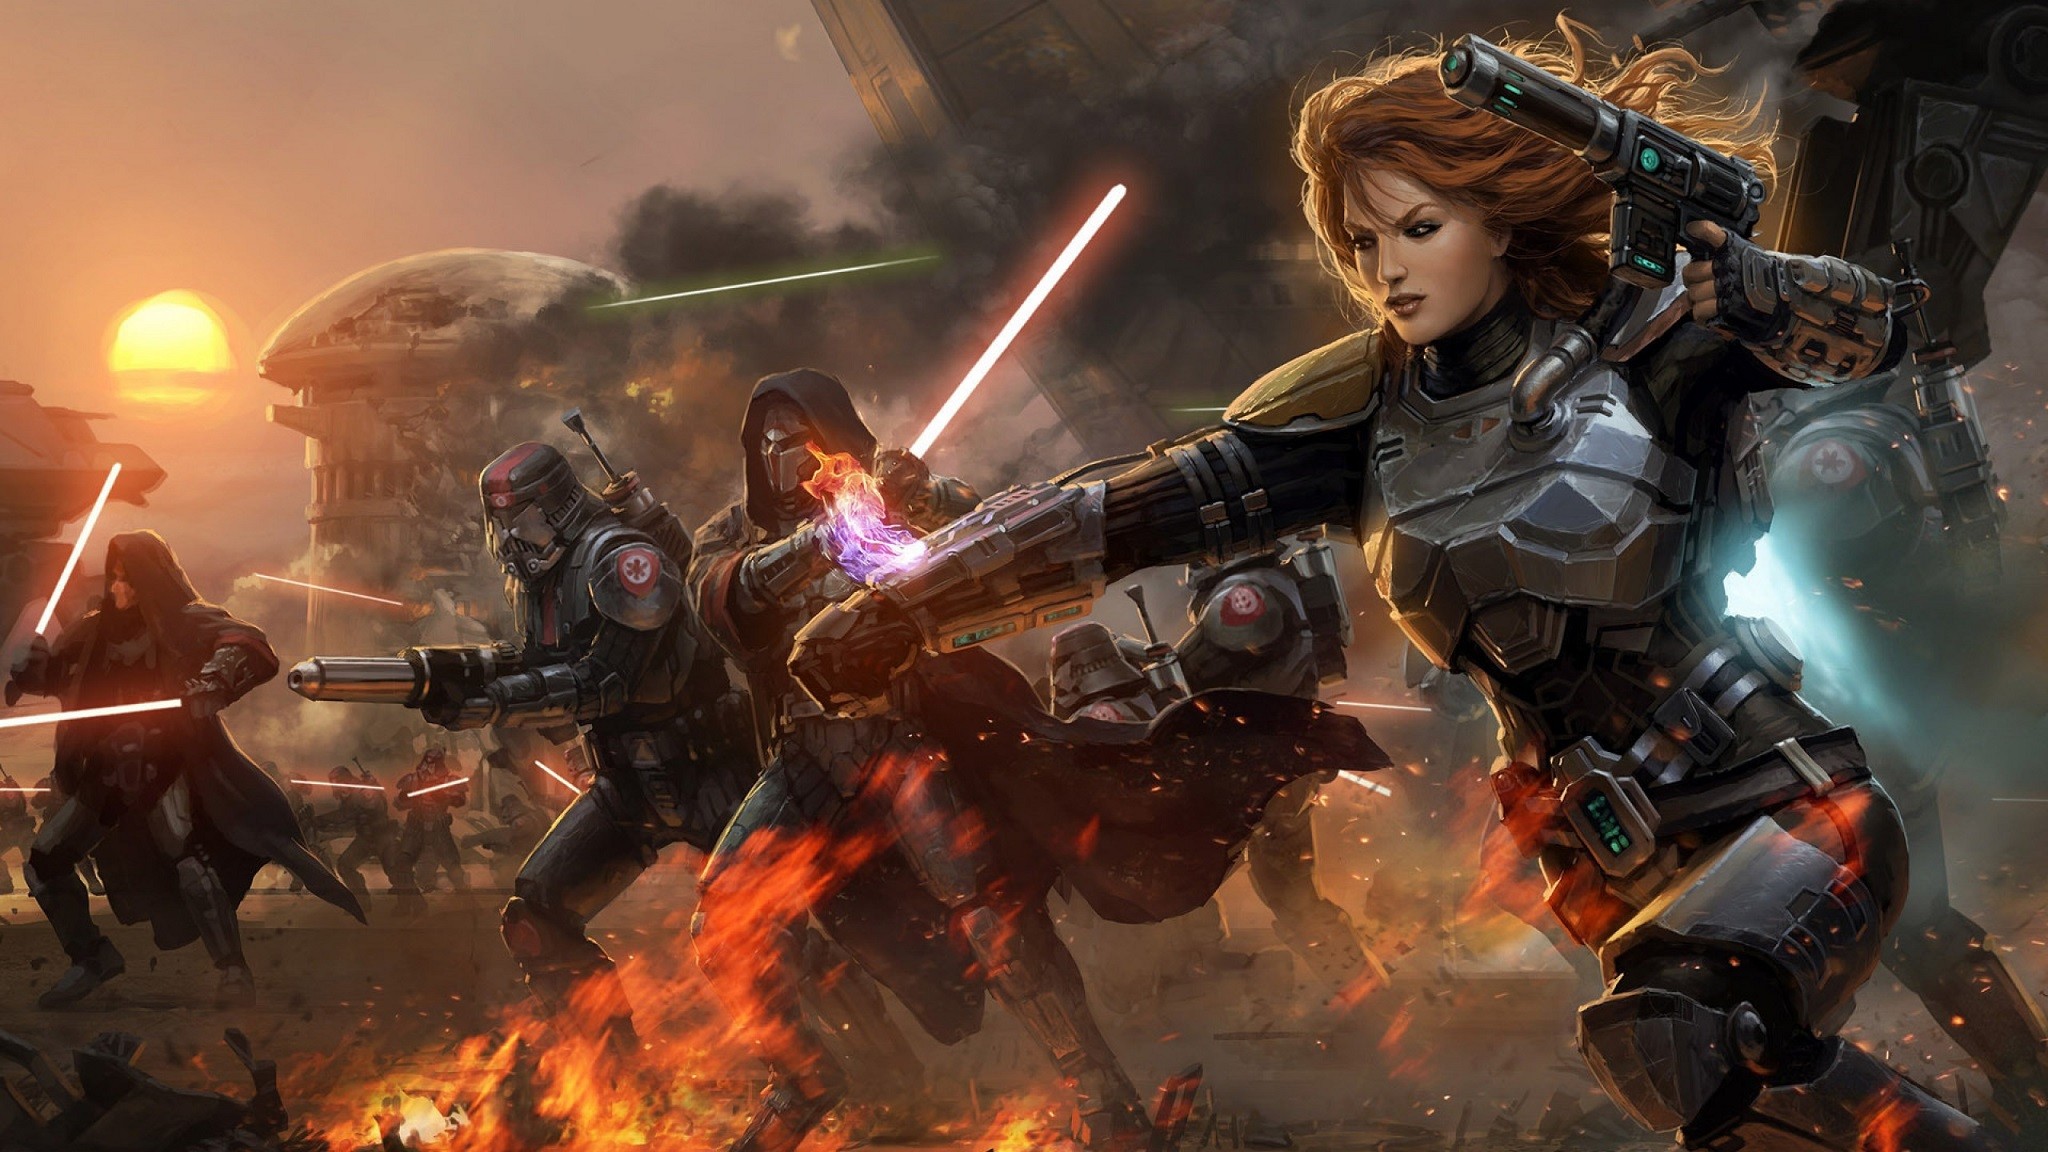 2048x1152 Video Game - Star Wars: The Old Republic Game Star Wars Battle Sci Fi  Lightsaber